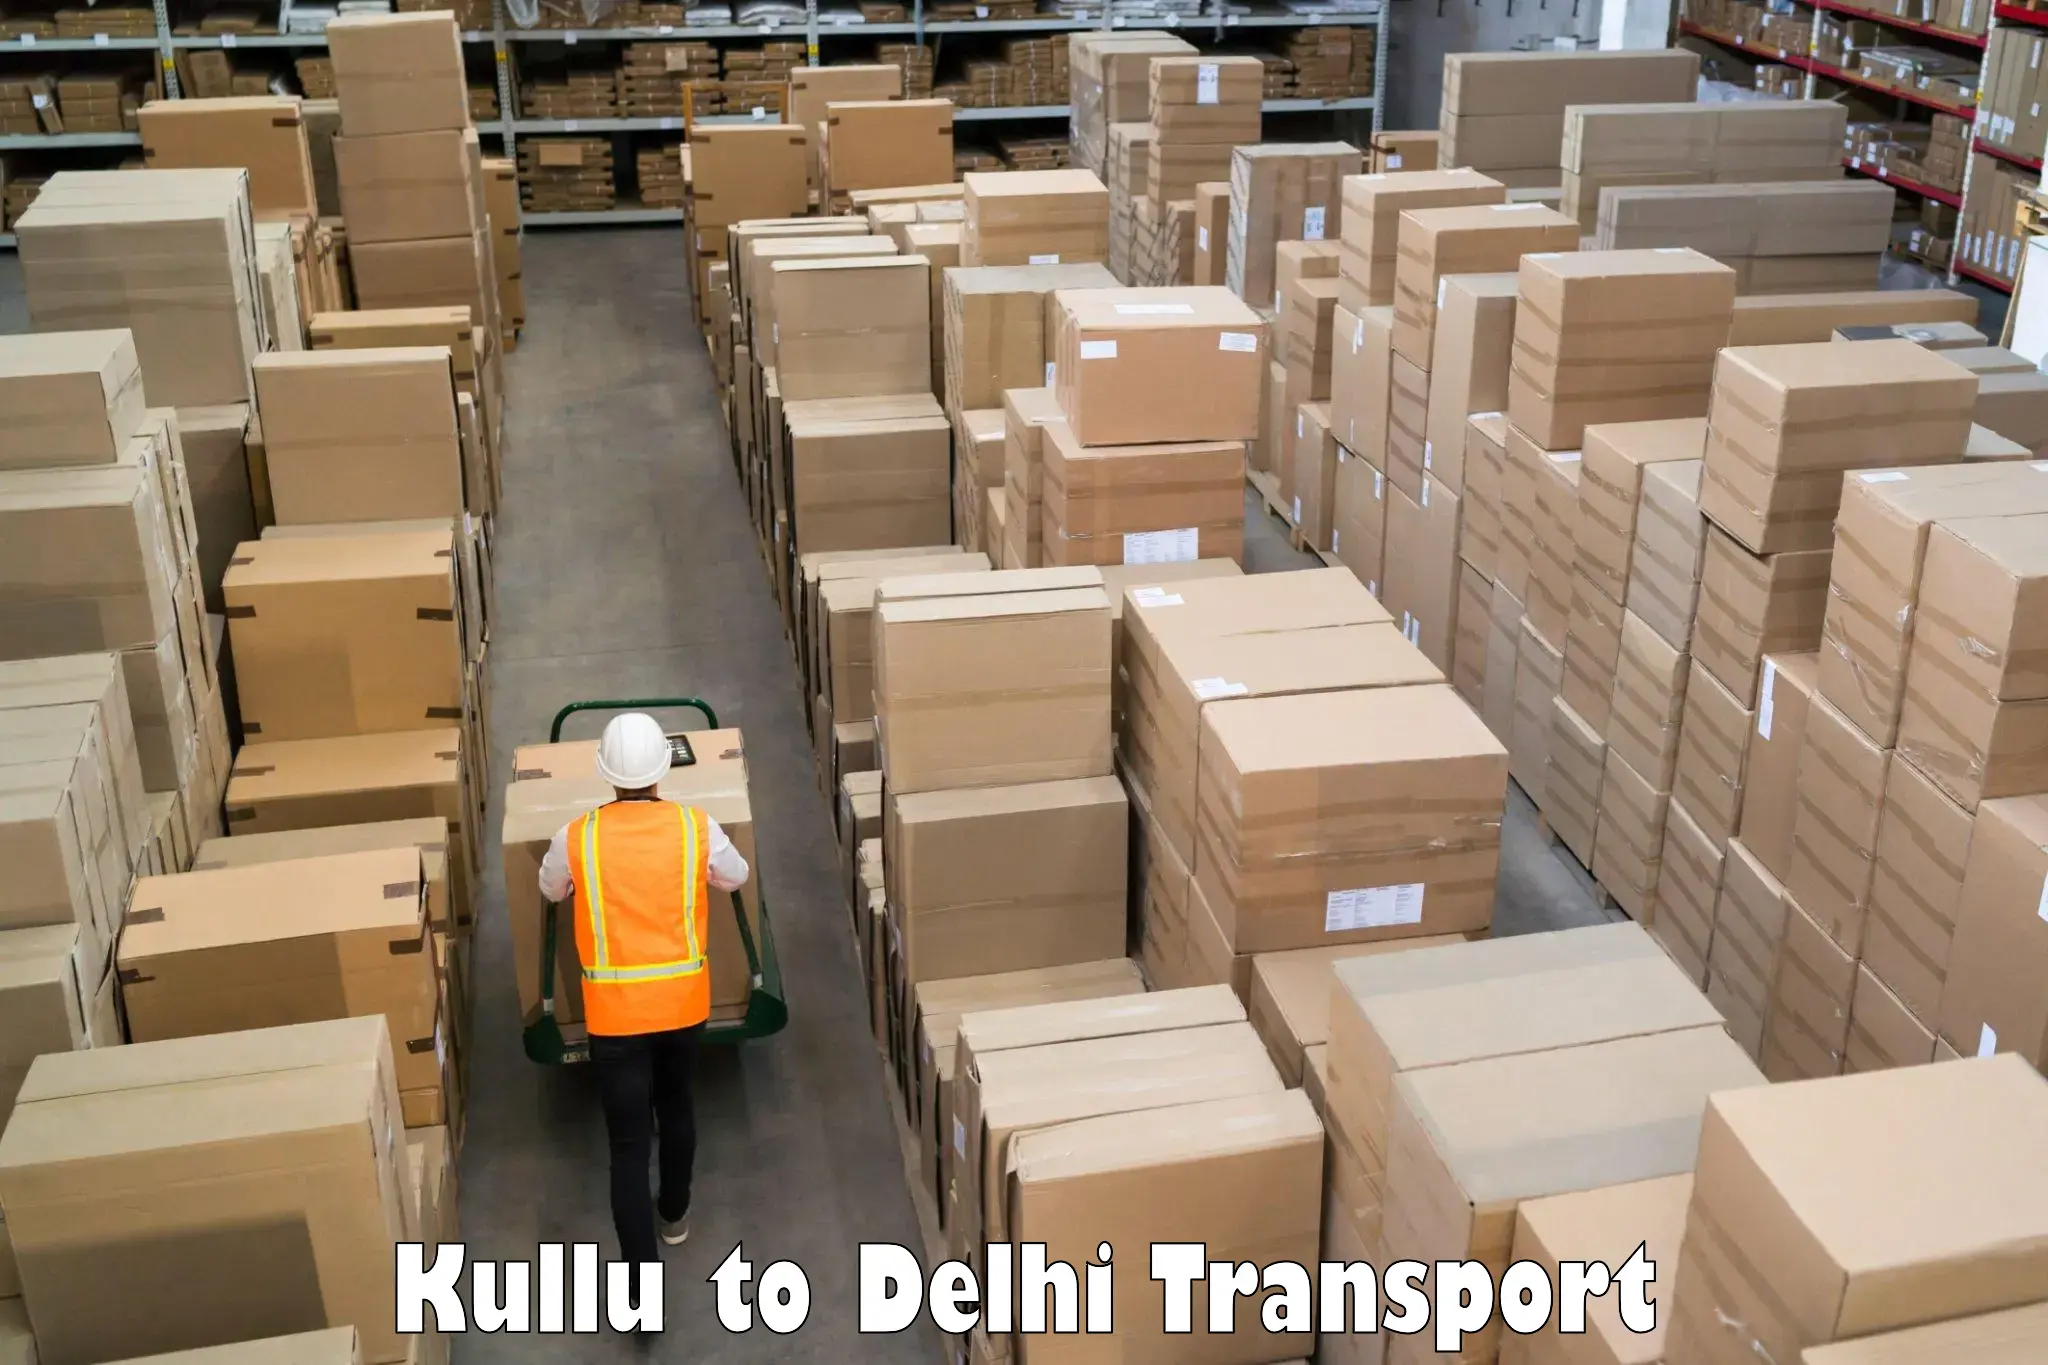 Container transport service Kullu to NCR